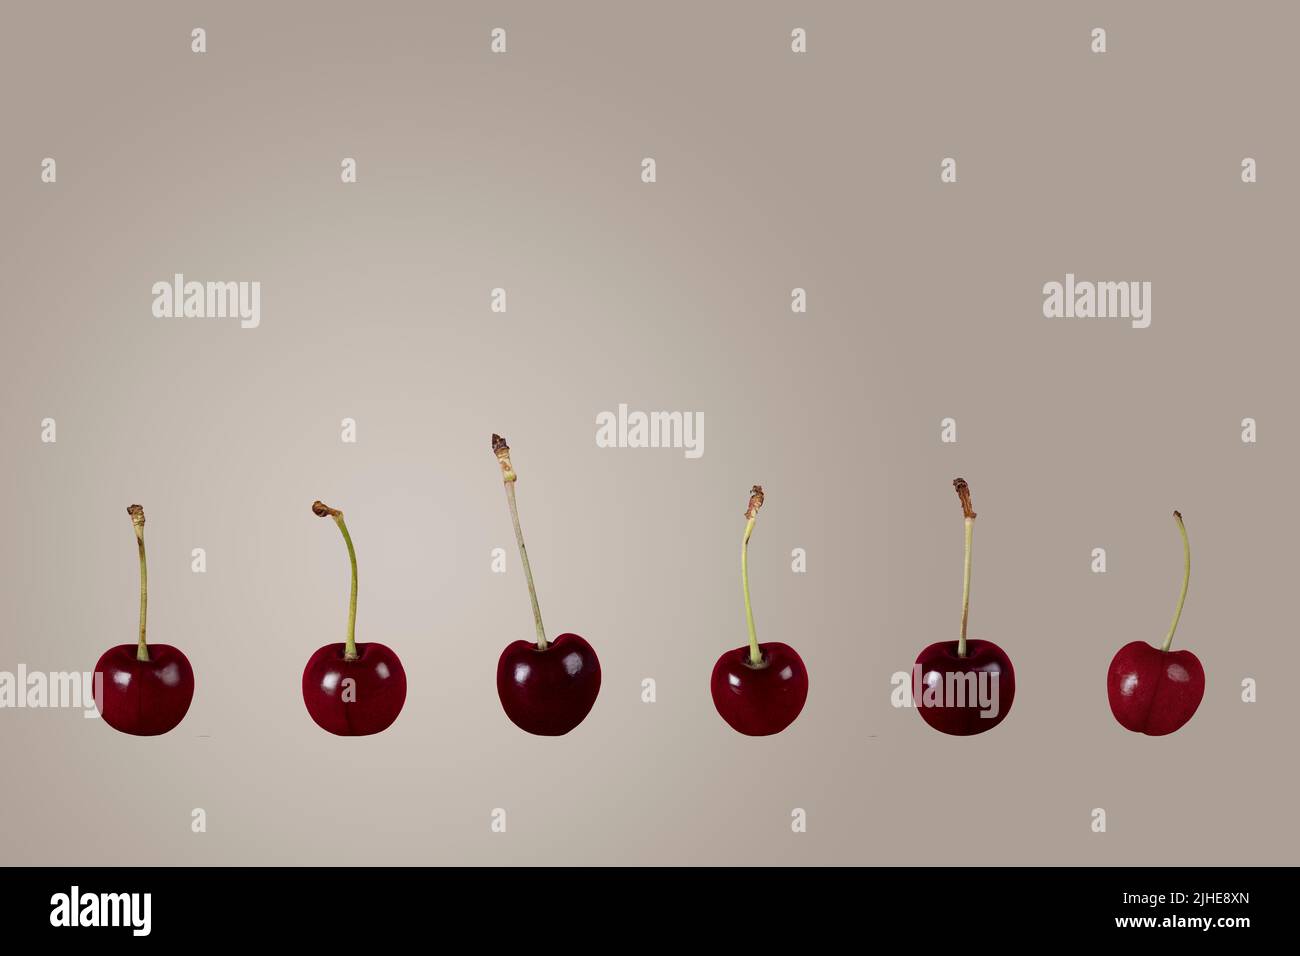 row line of ripe summer cherries cherry fruit on a colourful colorful grey background Stock Photo